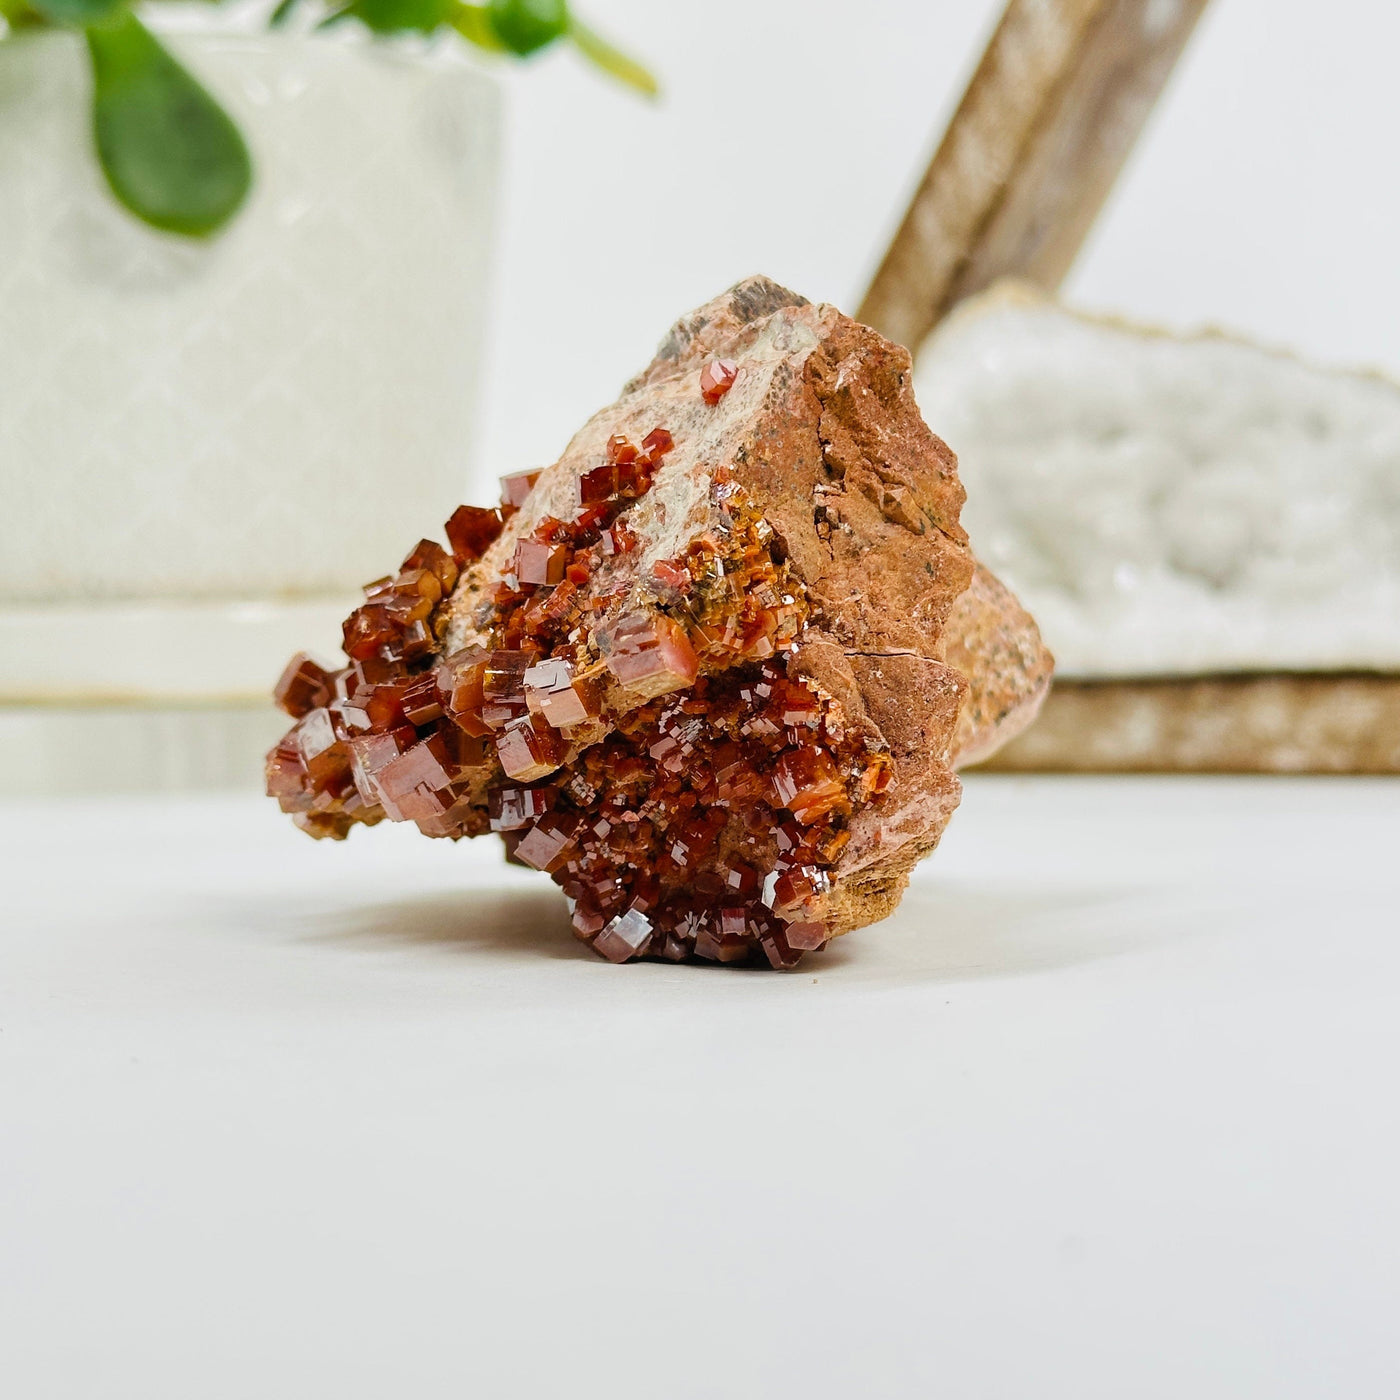 side view of Natural vanadinite formation with decorations in the background